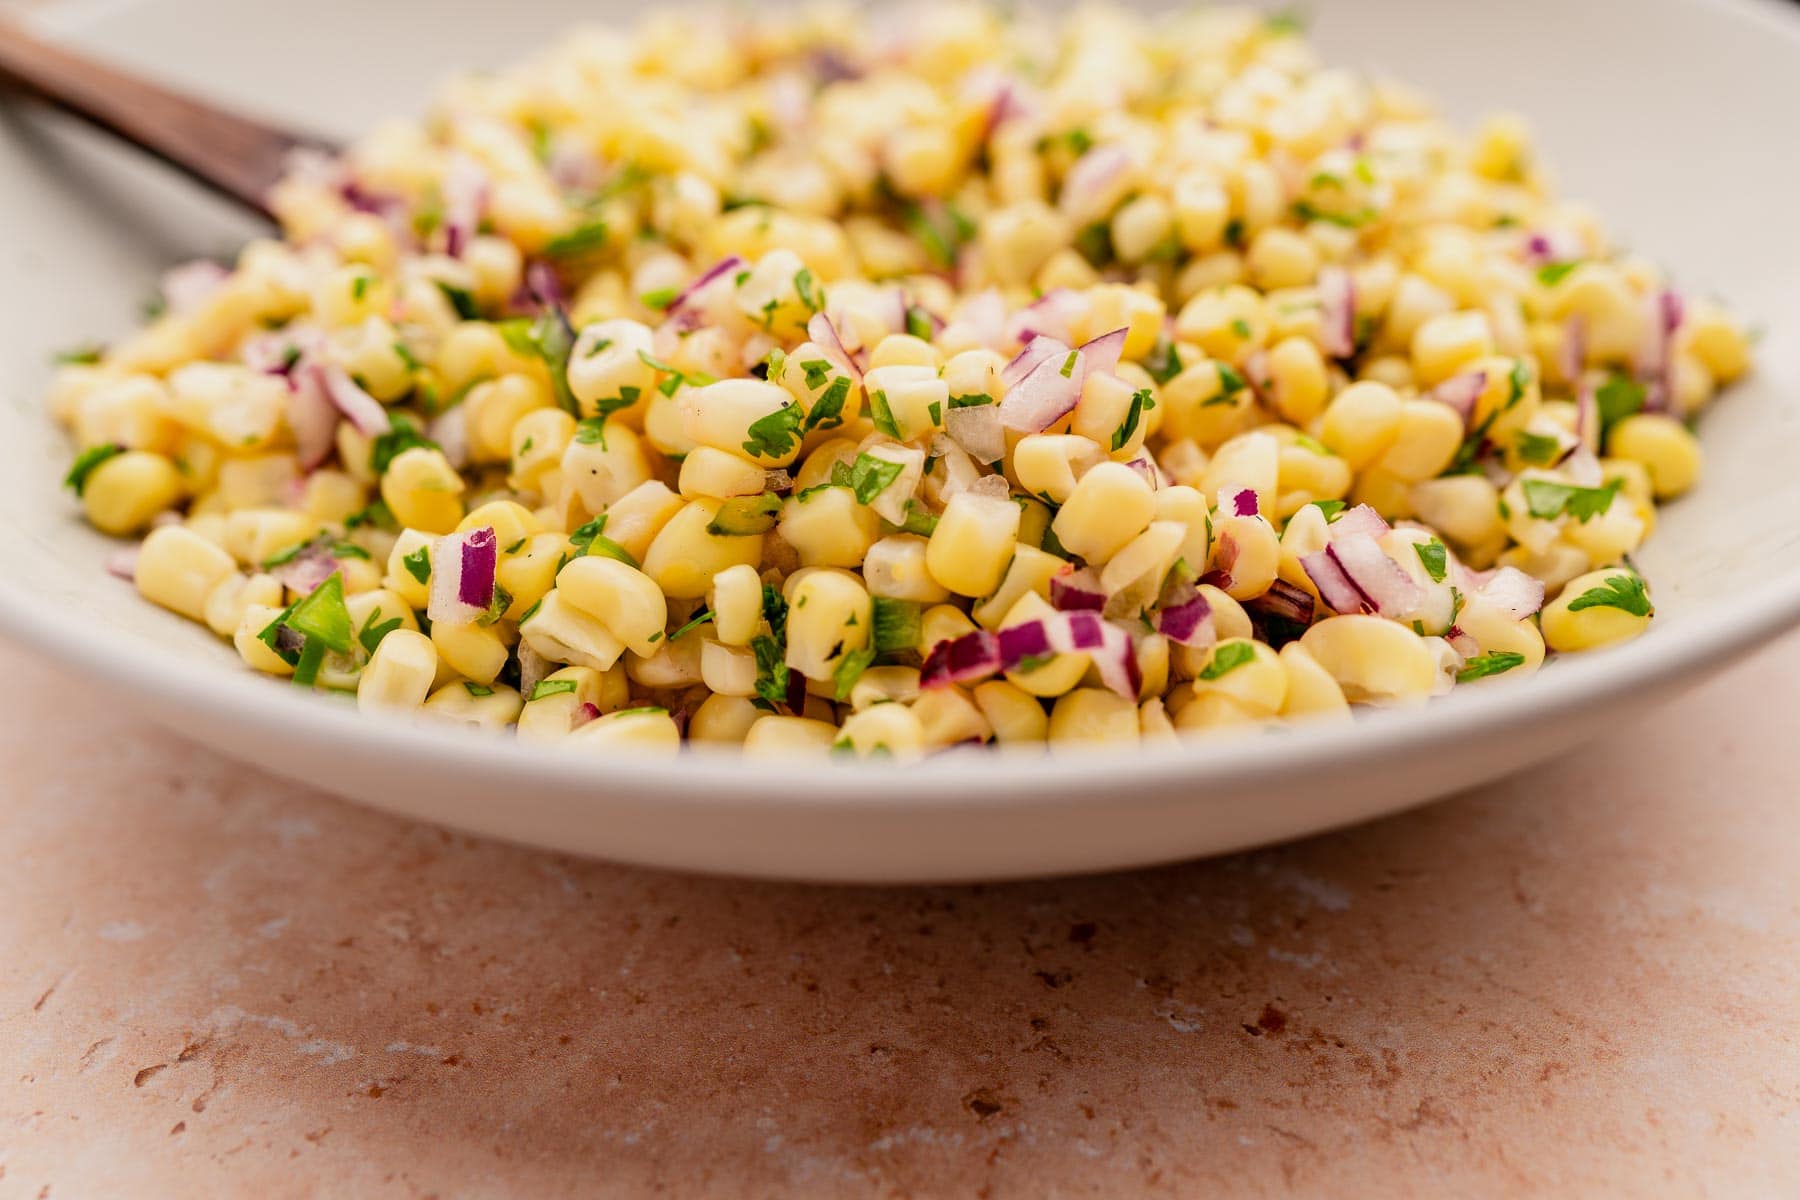 Corn salad in a white bowl with a wooden spoon, topped with chipotle corn salsa.